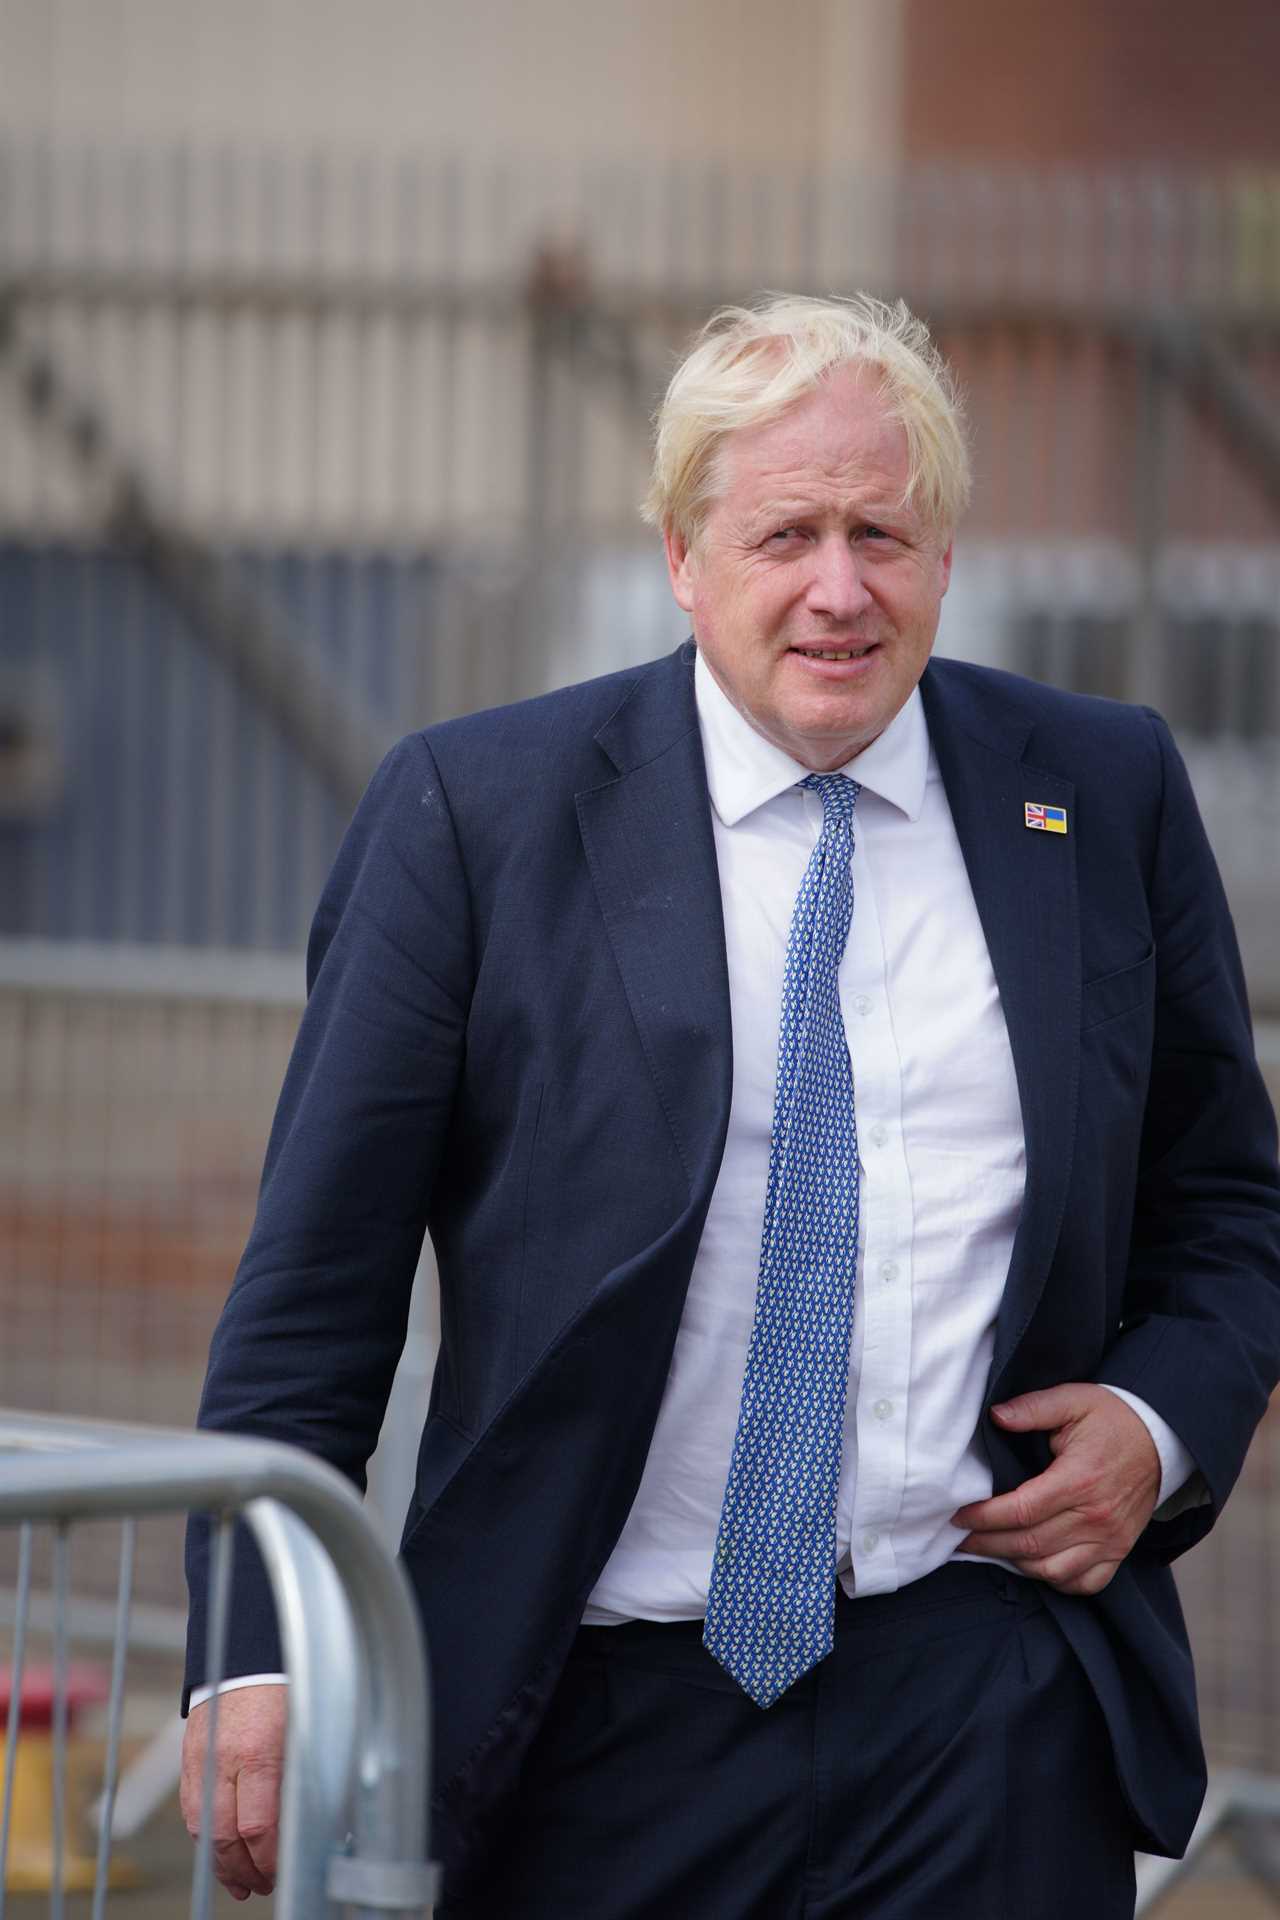 Boris Johnson to share flight with Liz Truss or Rishi Sunak to Balmoral to see Queen – but it’ll be awkward on way back